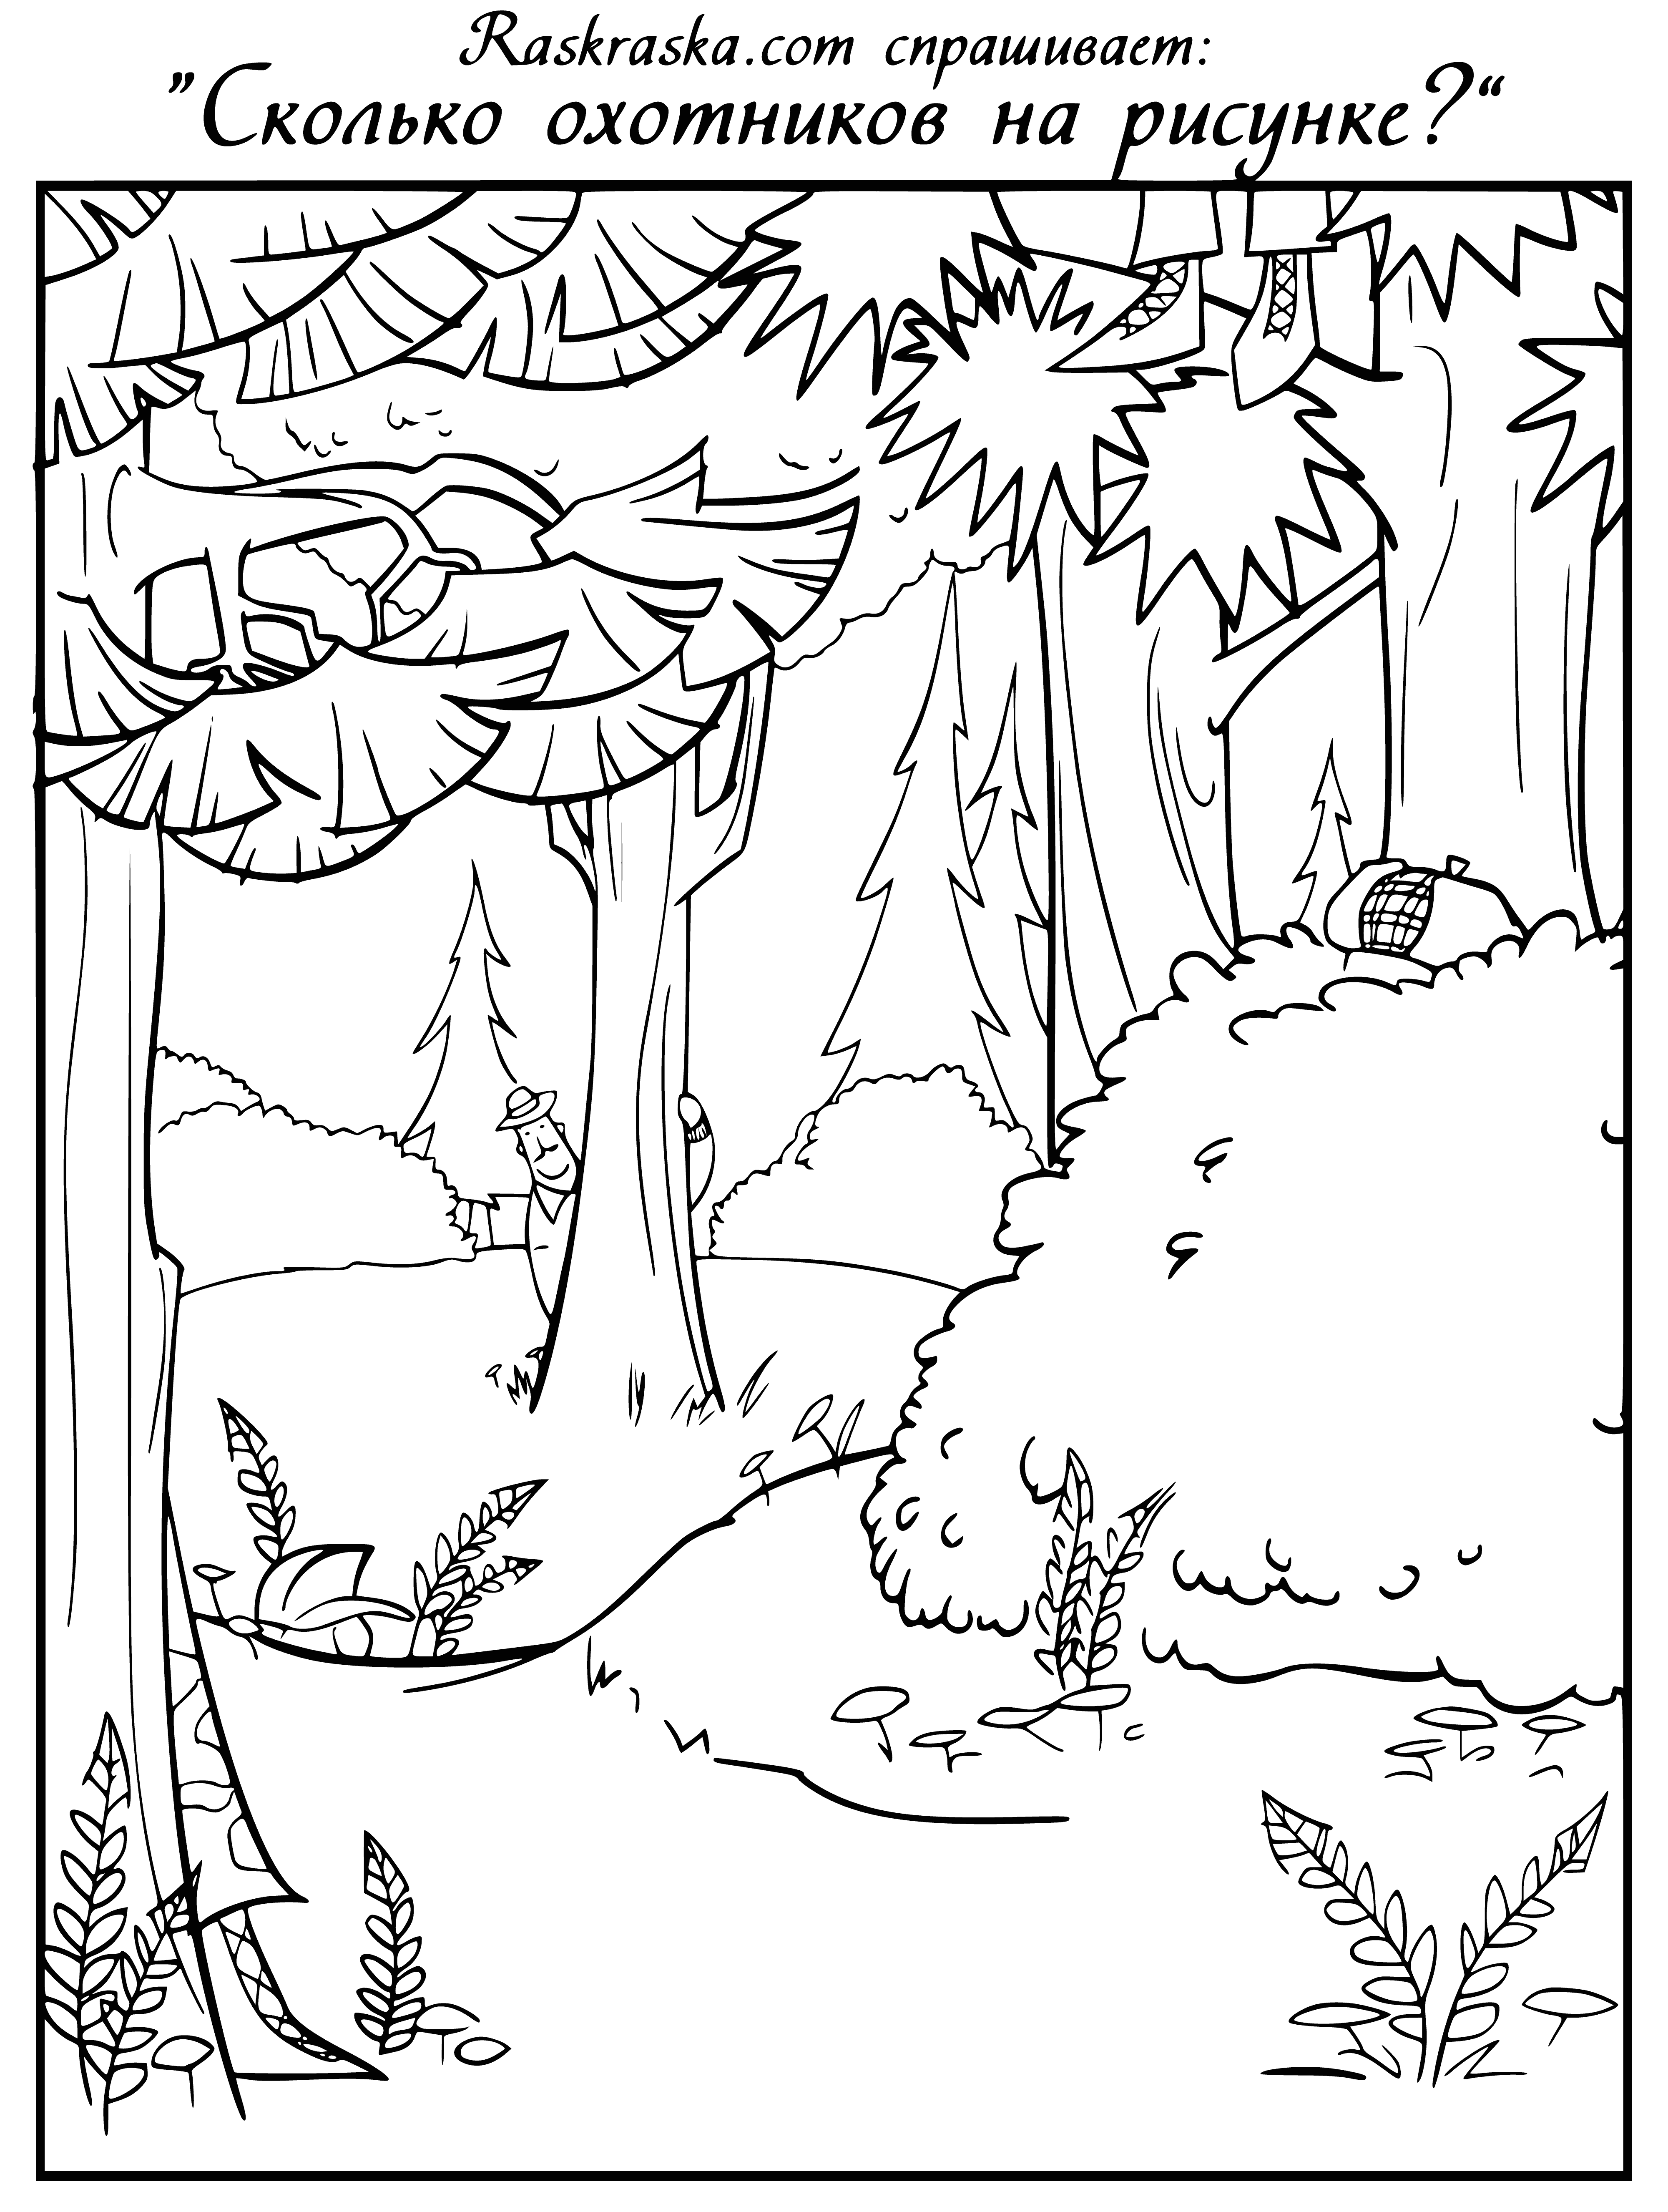 coloring page: Three hunters, a dog in camo, standing or sitting in a forest.